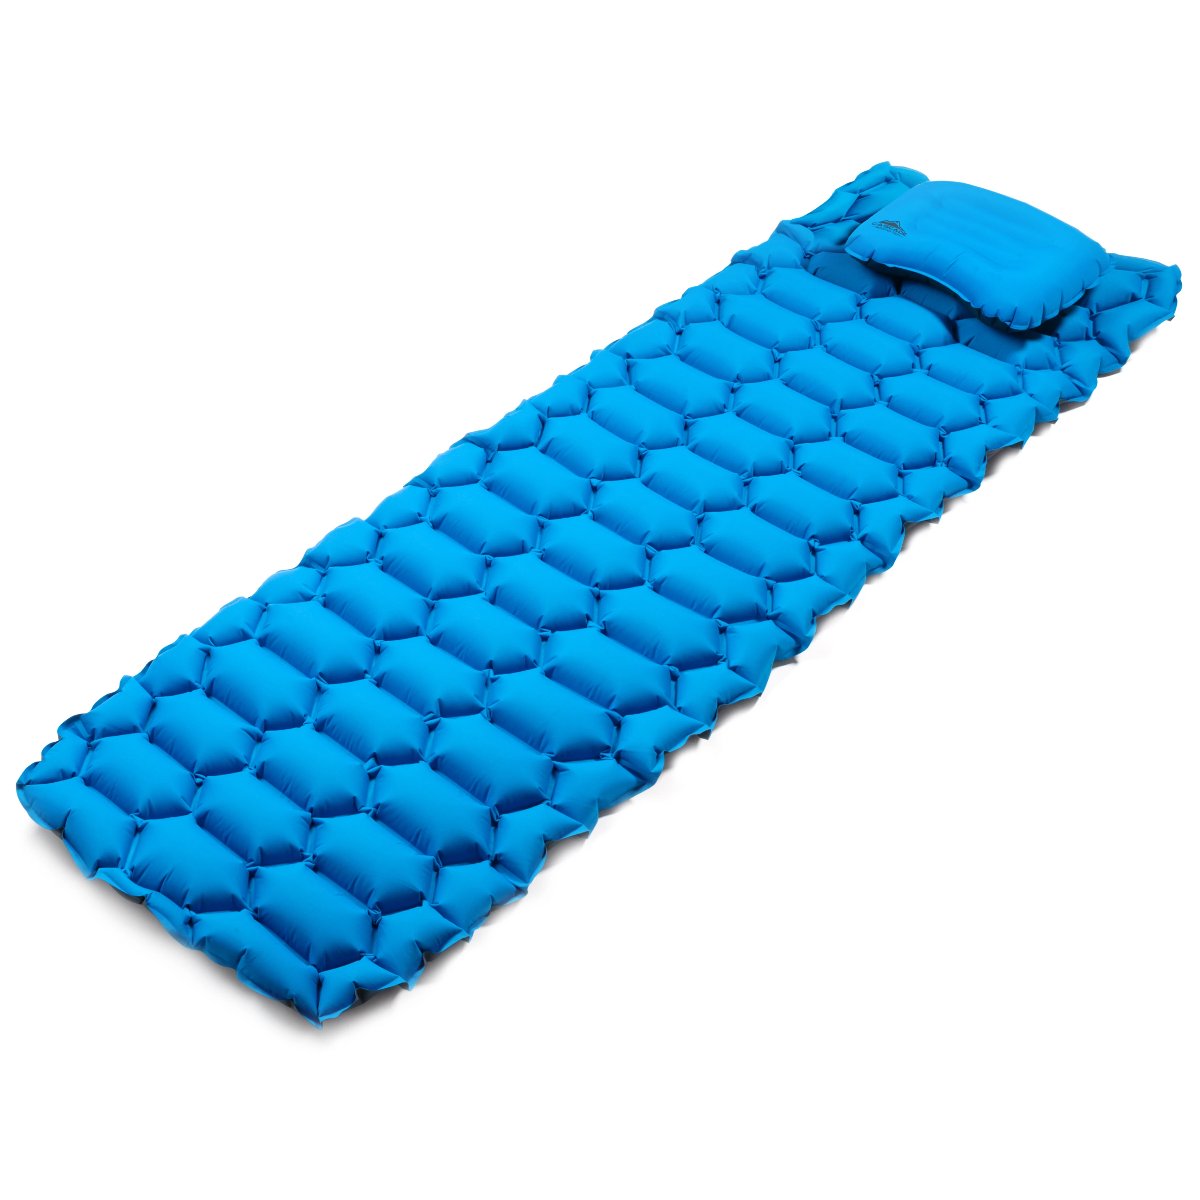 Sleeping Pads & Camping Mats: How to Choose